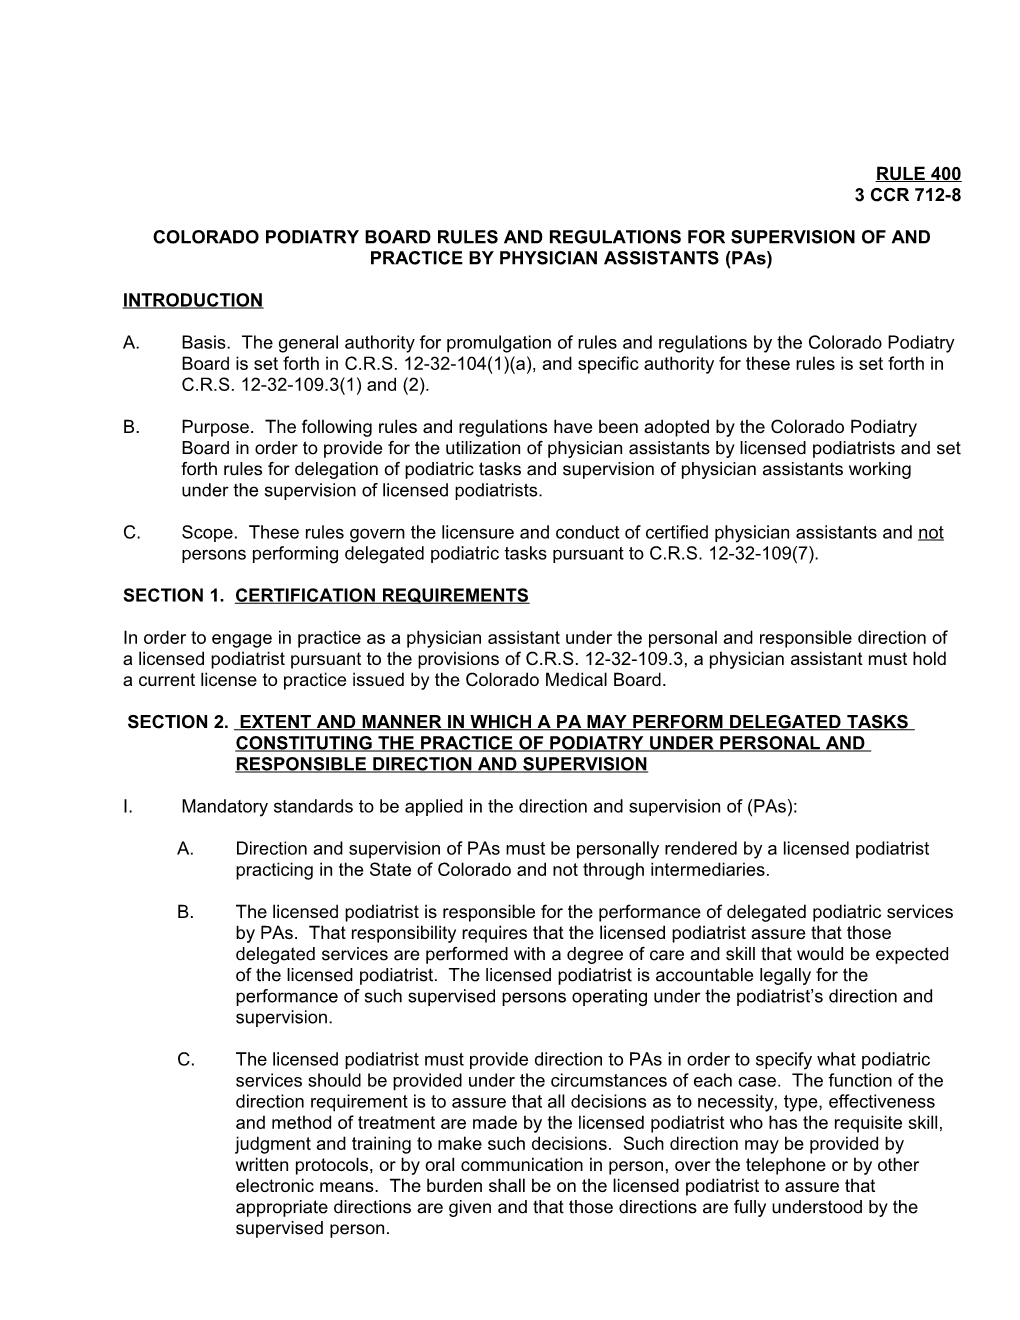 Colorado Podiatry Board Rules and Regulations for Supervision of and Practice by Physician